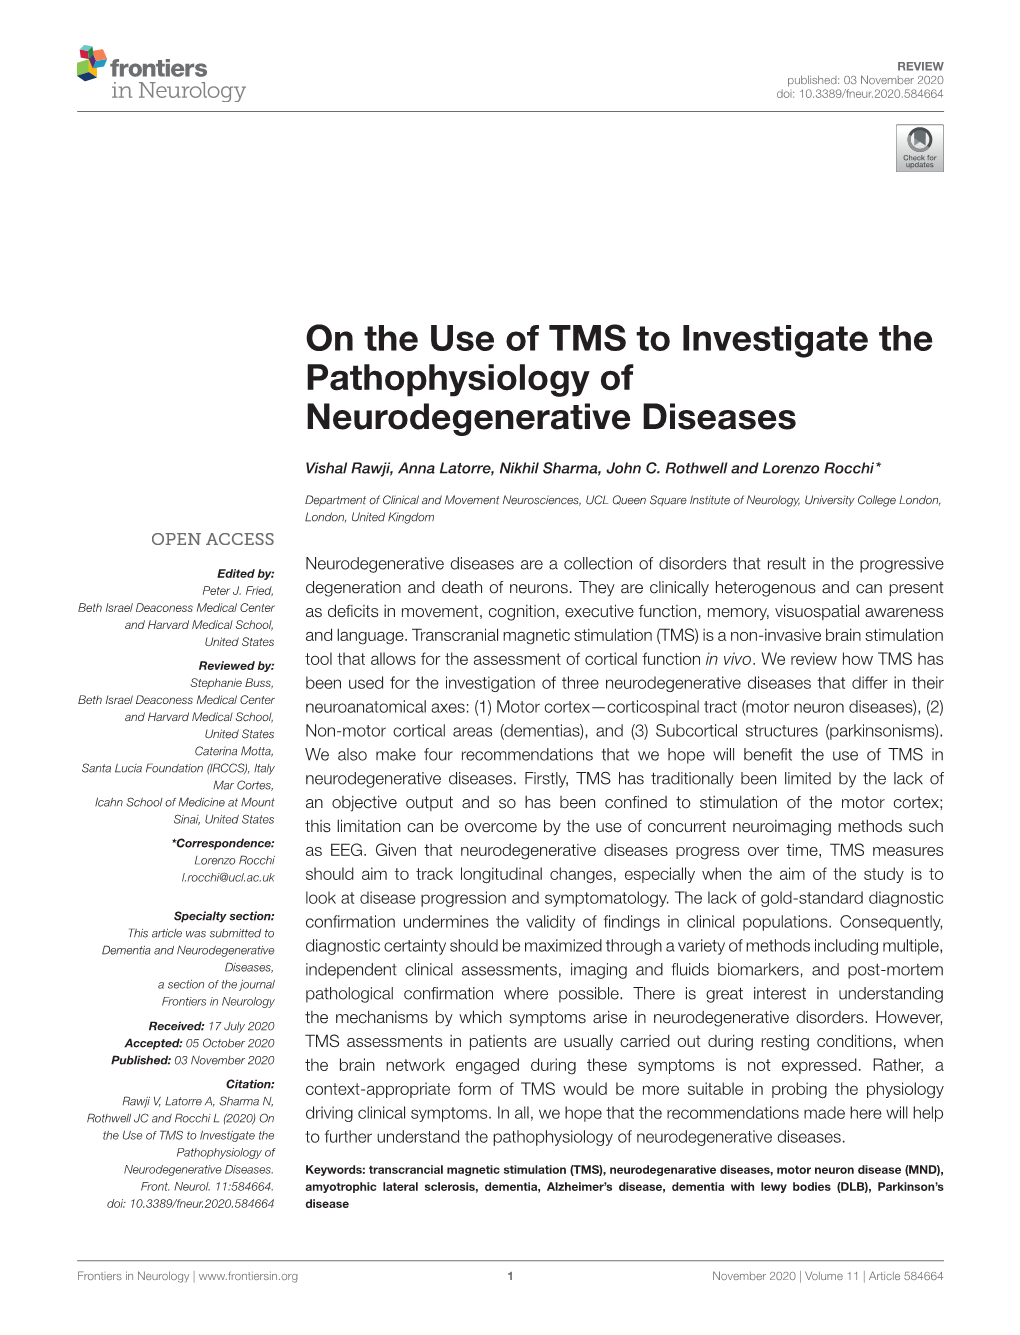 On the Use of TMS to Investigate the Pathophysiology of Neurodegenerative Diseases